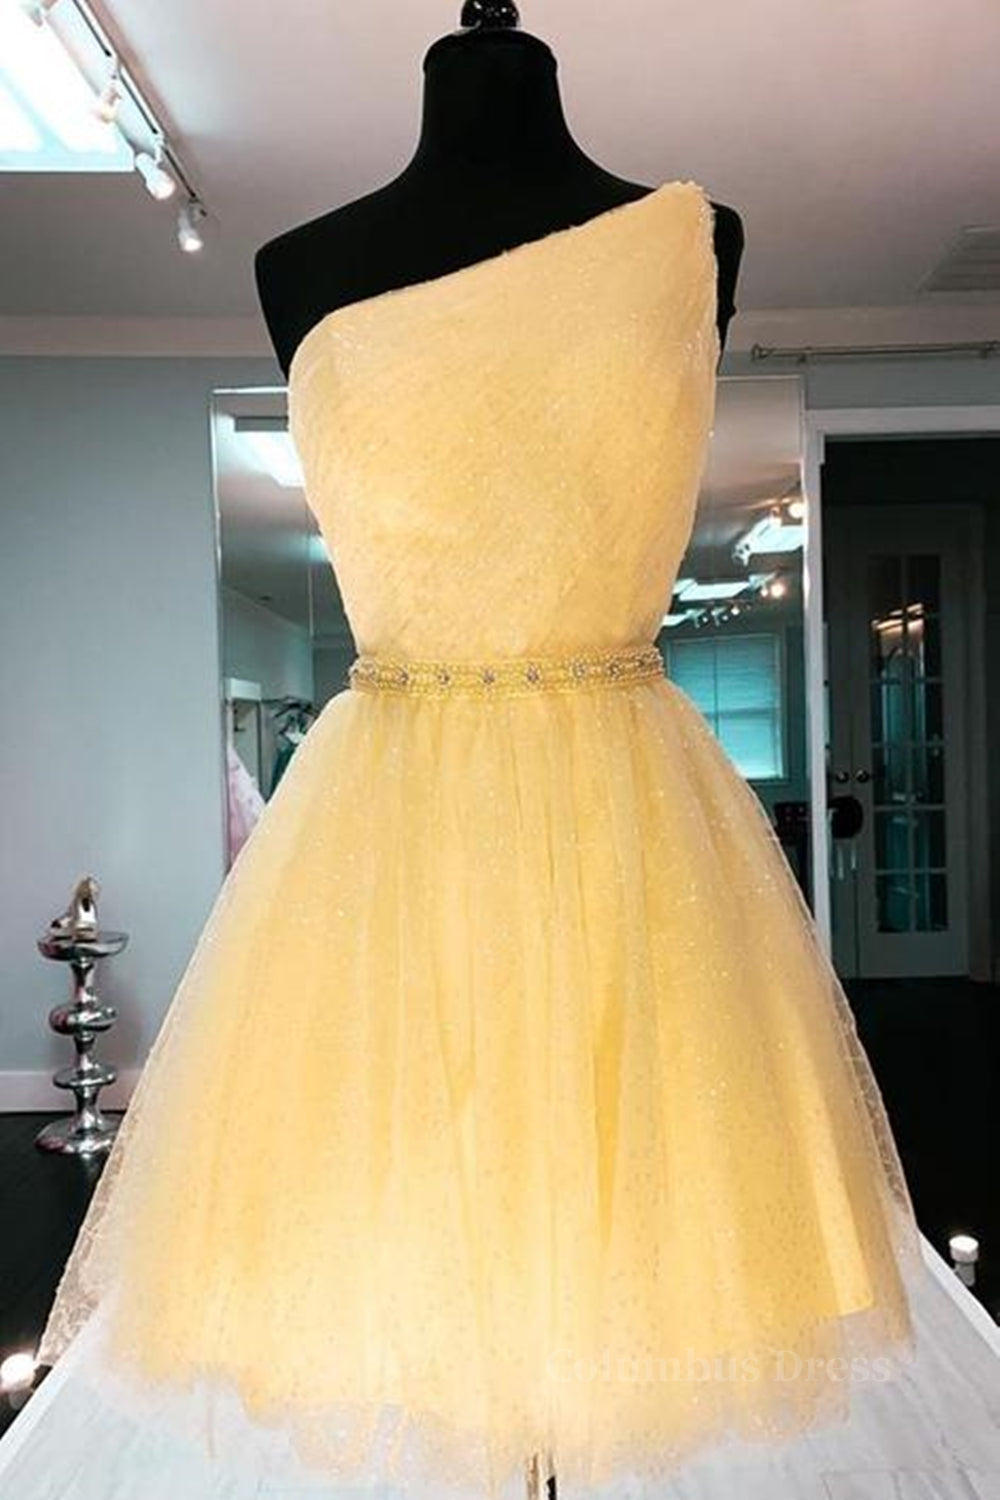 Shiny One Shoulder Yellow Short Corset Prom Corset Homecoming Dress with Belt, Short One Shoulder Yellow Corset Formal Evening Dress outfit, Evening Dress Prom